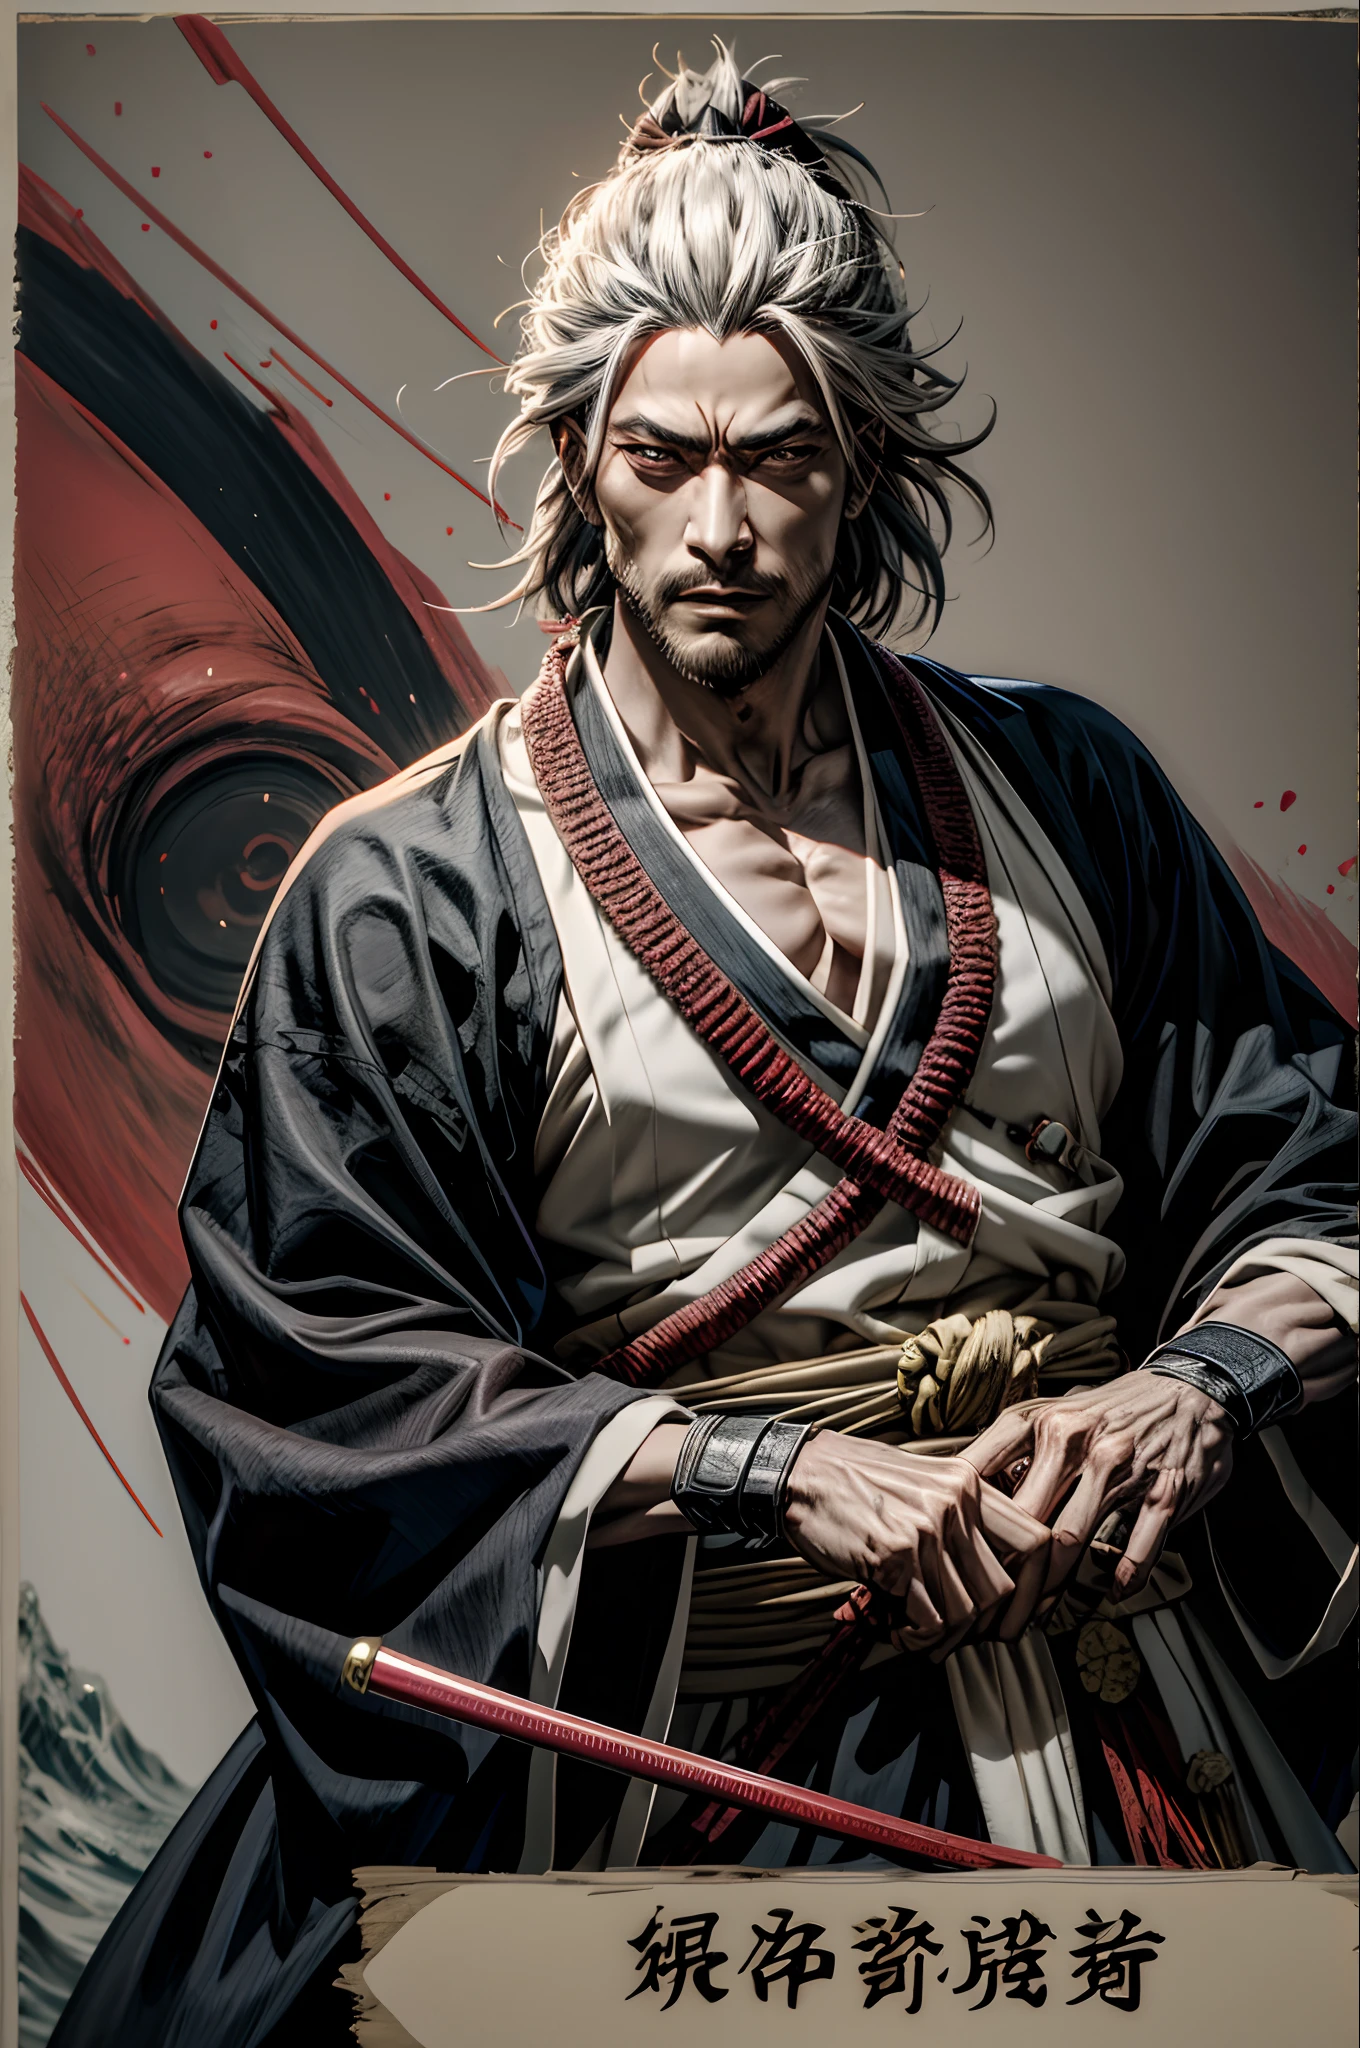 1 samurai man,high qualiy, master part, Japanese anime, two-dimensional, Beautiful  eyes, extreme detailed background, 8 k wallpaper, extreme detailed face) Ten, Highly muscular body, strong muscles, barba, hopeful eyes, glare eyes, blue colored eyes, mature and steady, sophisticated, white short sleeves, Retrato de Onmyoji, miyamoto musashi, detailed anime character art, Pavilion background,in the style of 0mib, bleach style